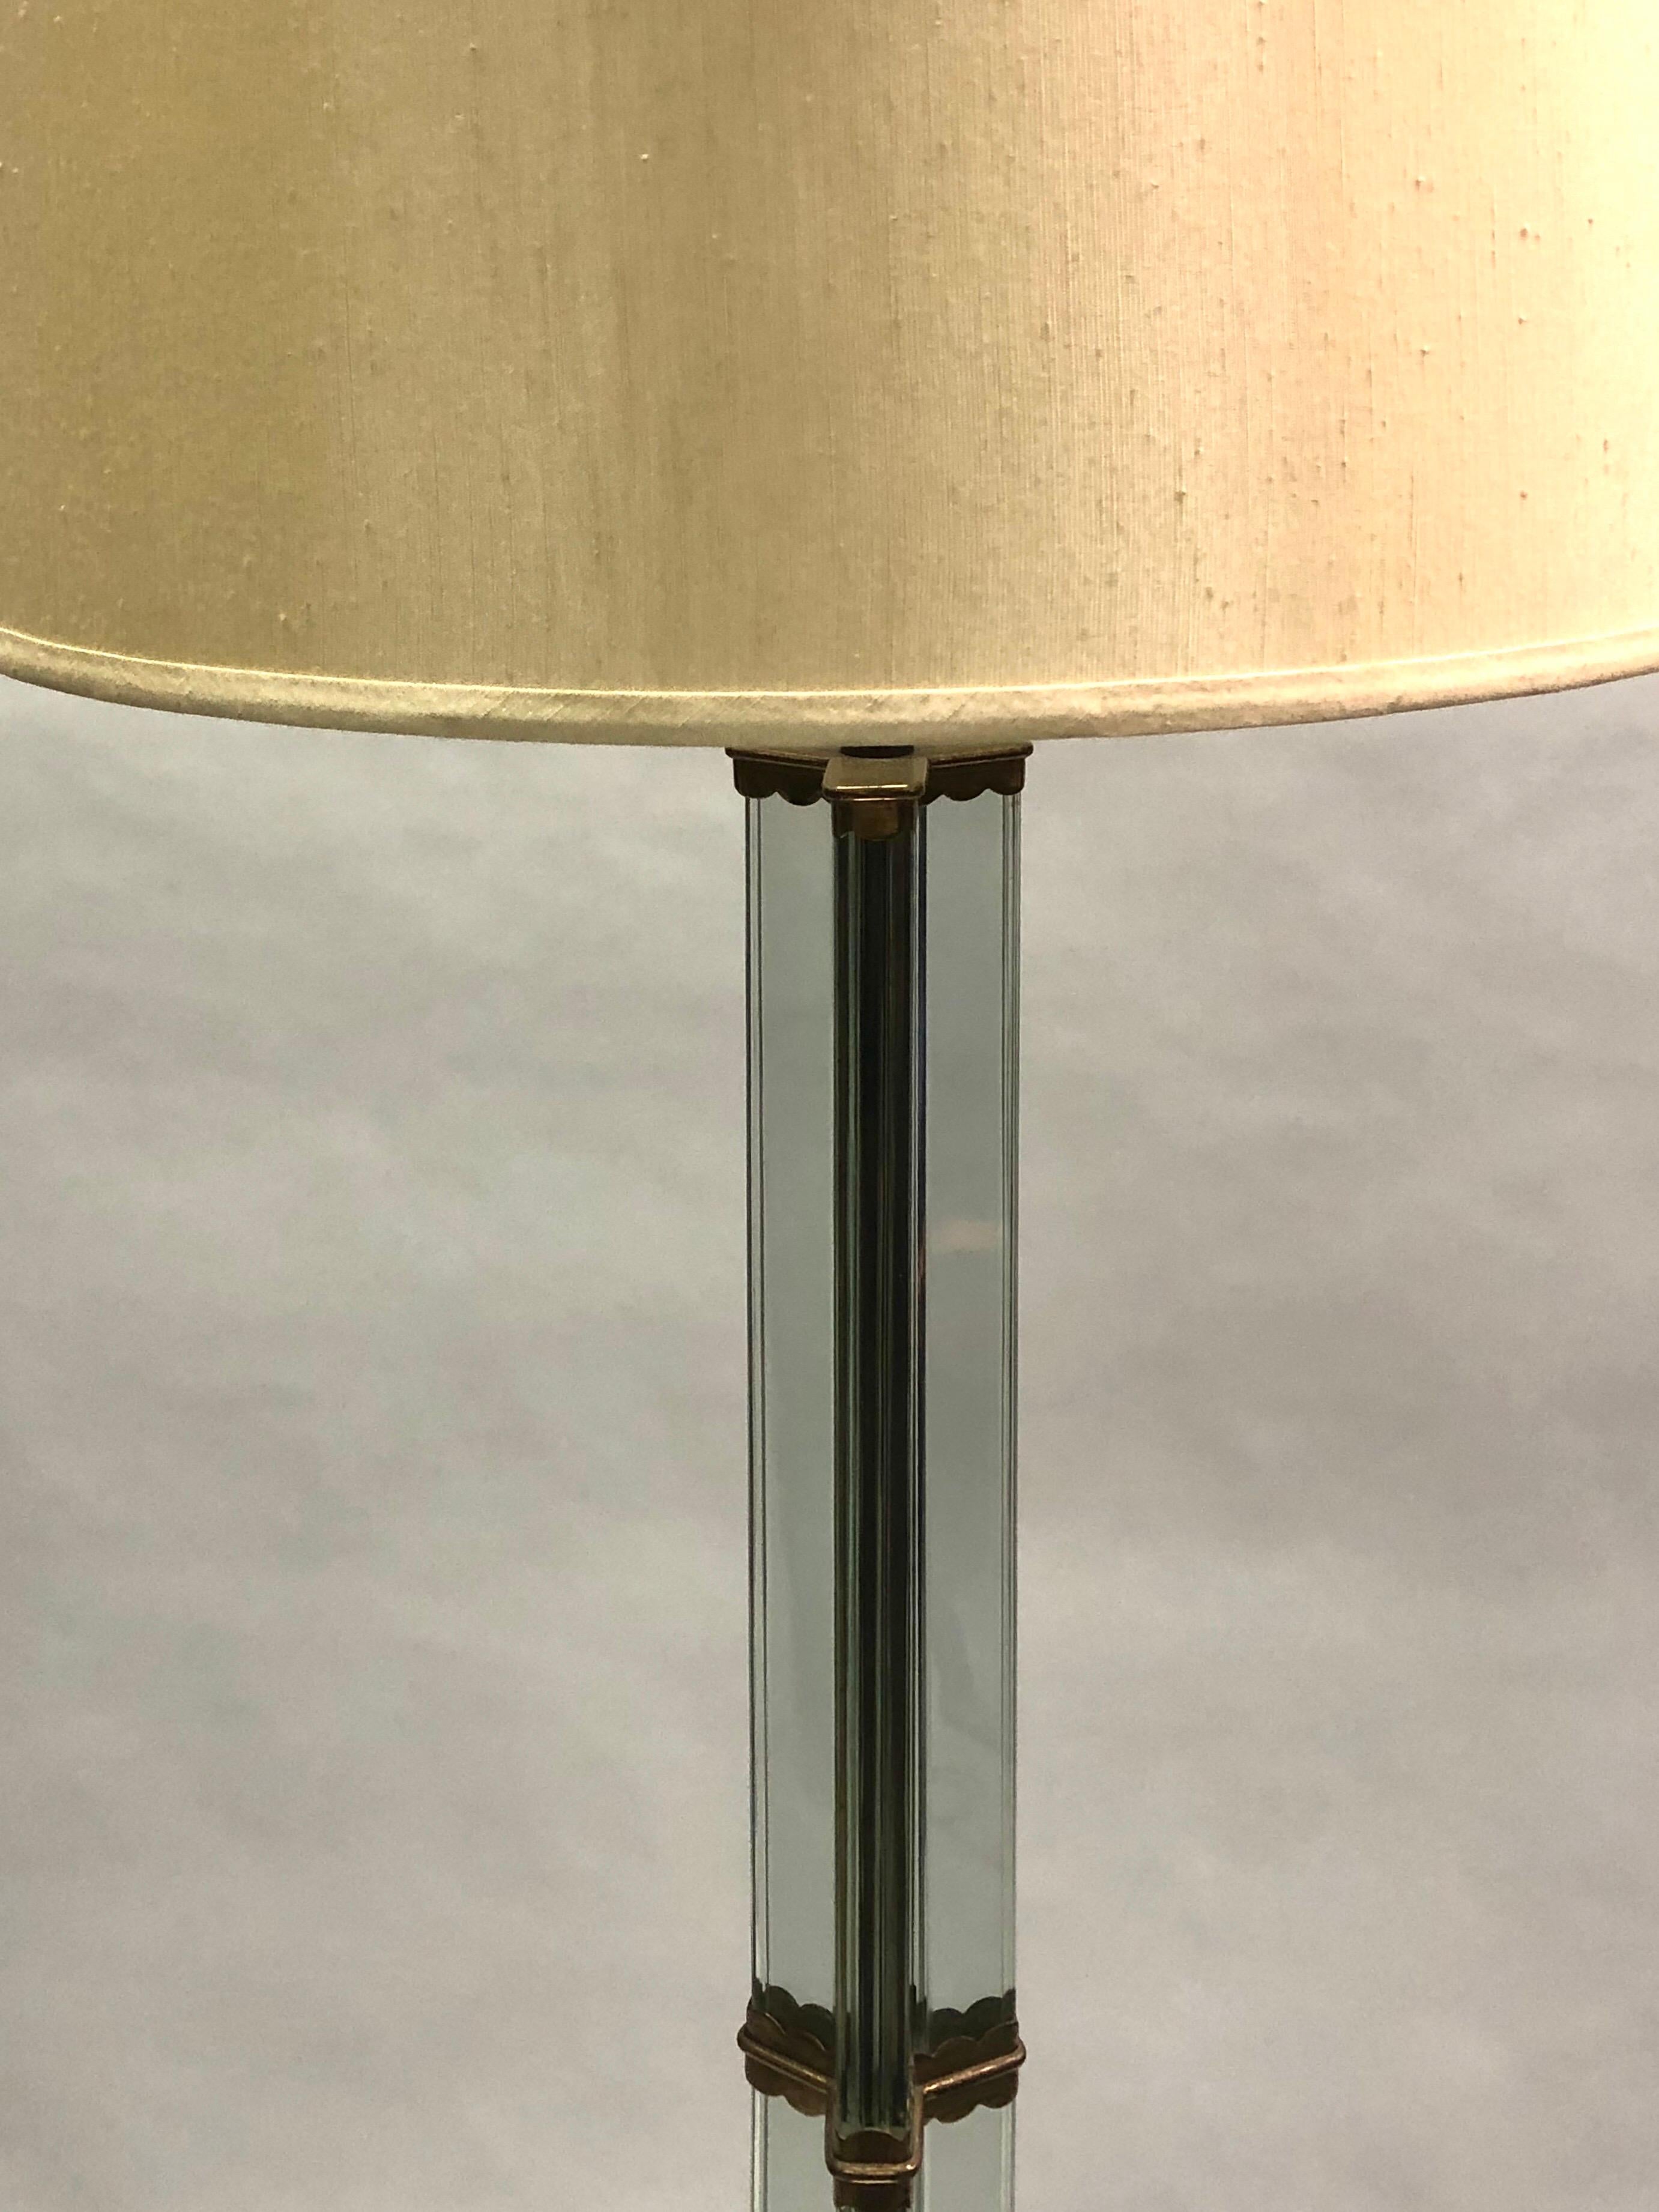 A rare, elegant and timeless hand-crafted Italian Mid-Century Modern ('Novecento') glass standing lamp in the Modern Neoclassical spirit by Pietro Chiesa for Fontana Arte circa 1930. The piece reflects timeless Italian handicraft, the art deco and